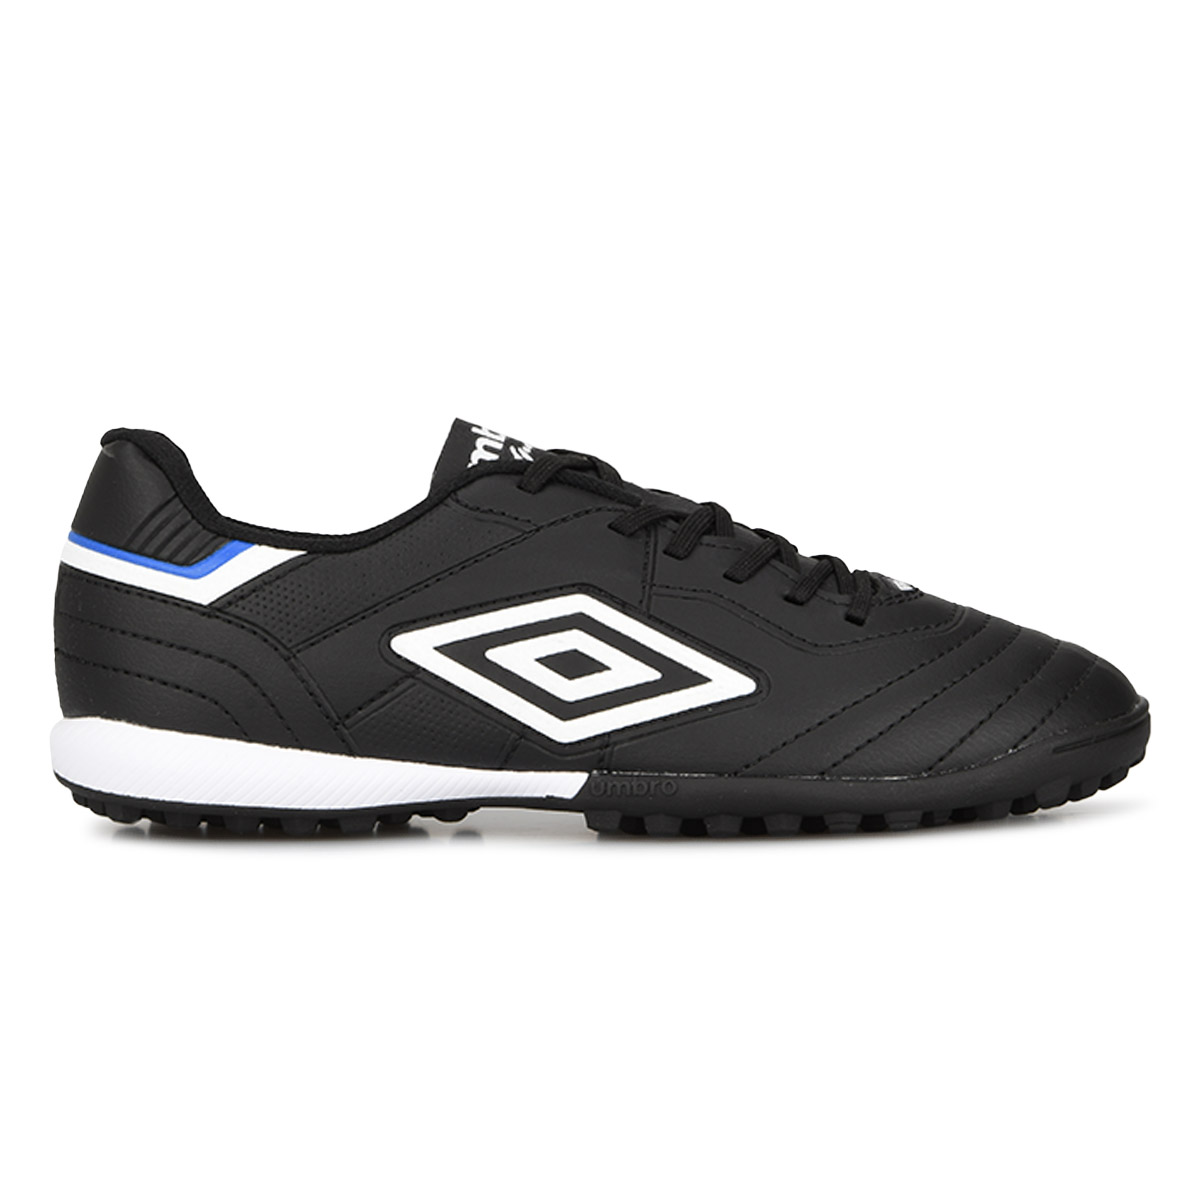 Botines Umbro Speciali lll League Sintetico,  image number null